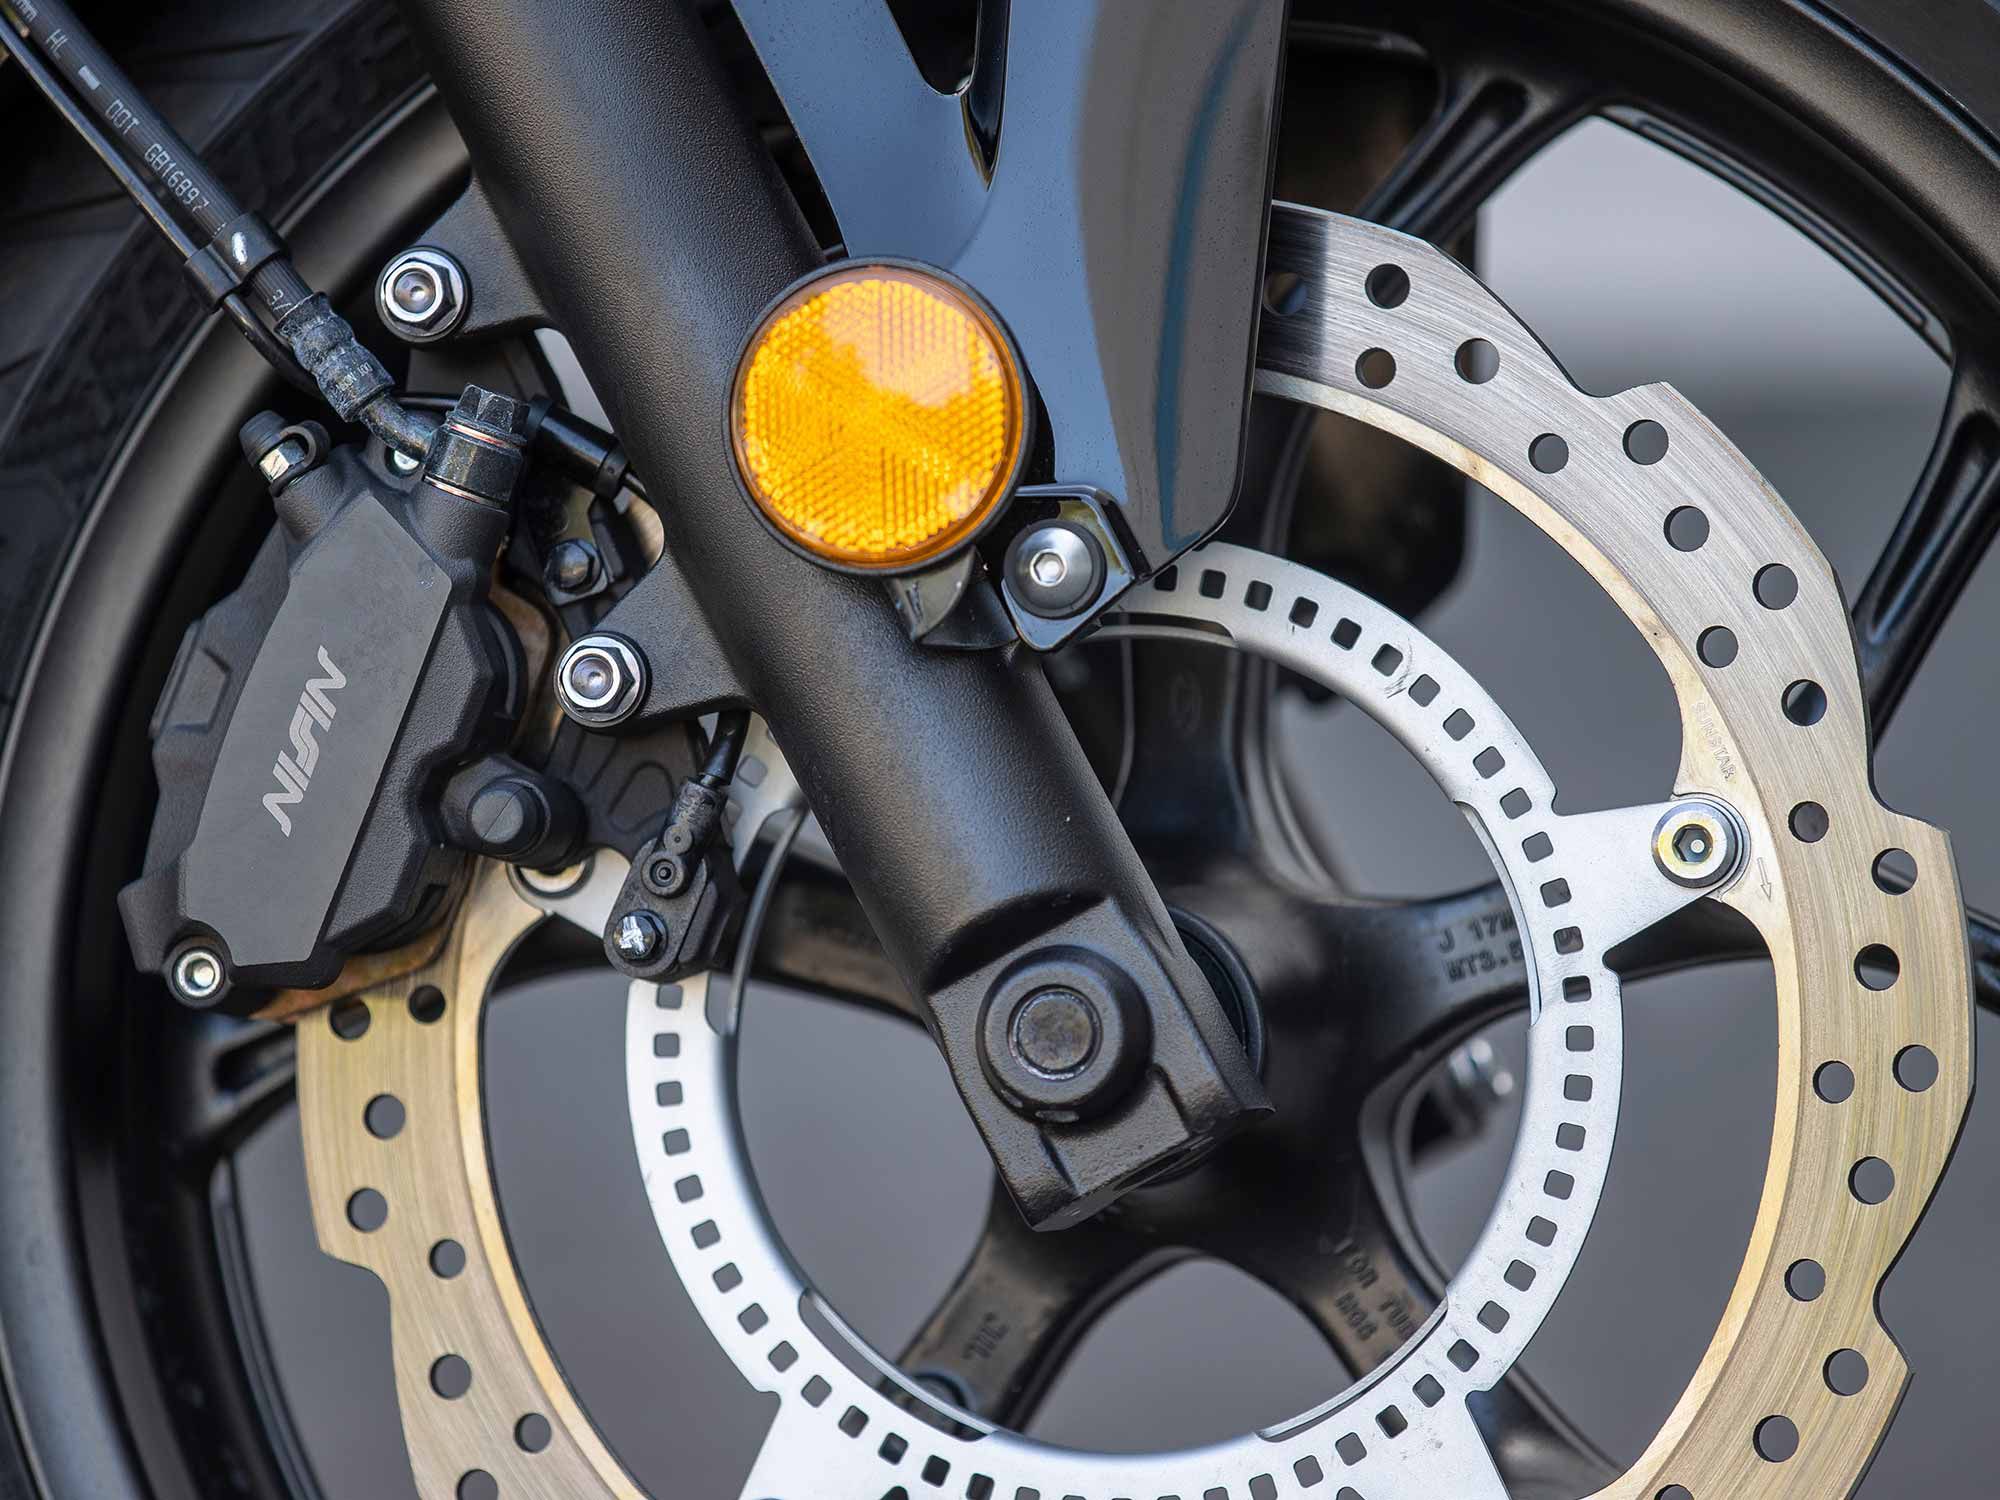 A single two-piston caliper and 320mm disc bring the NC750X to a halt. Considering its hefty 493-pound curb weight, it’s questionable why a second caliper isn’t utilized.